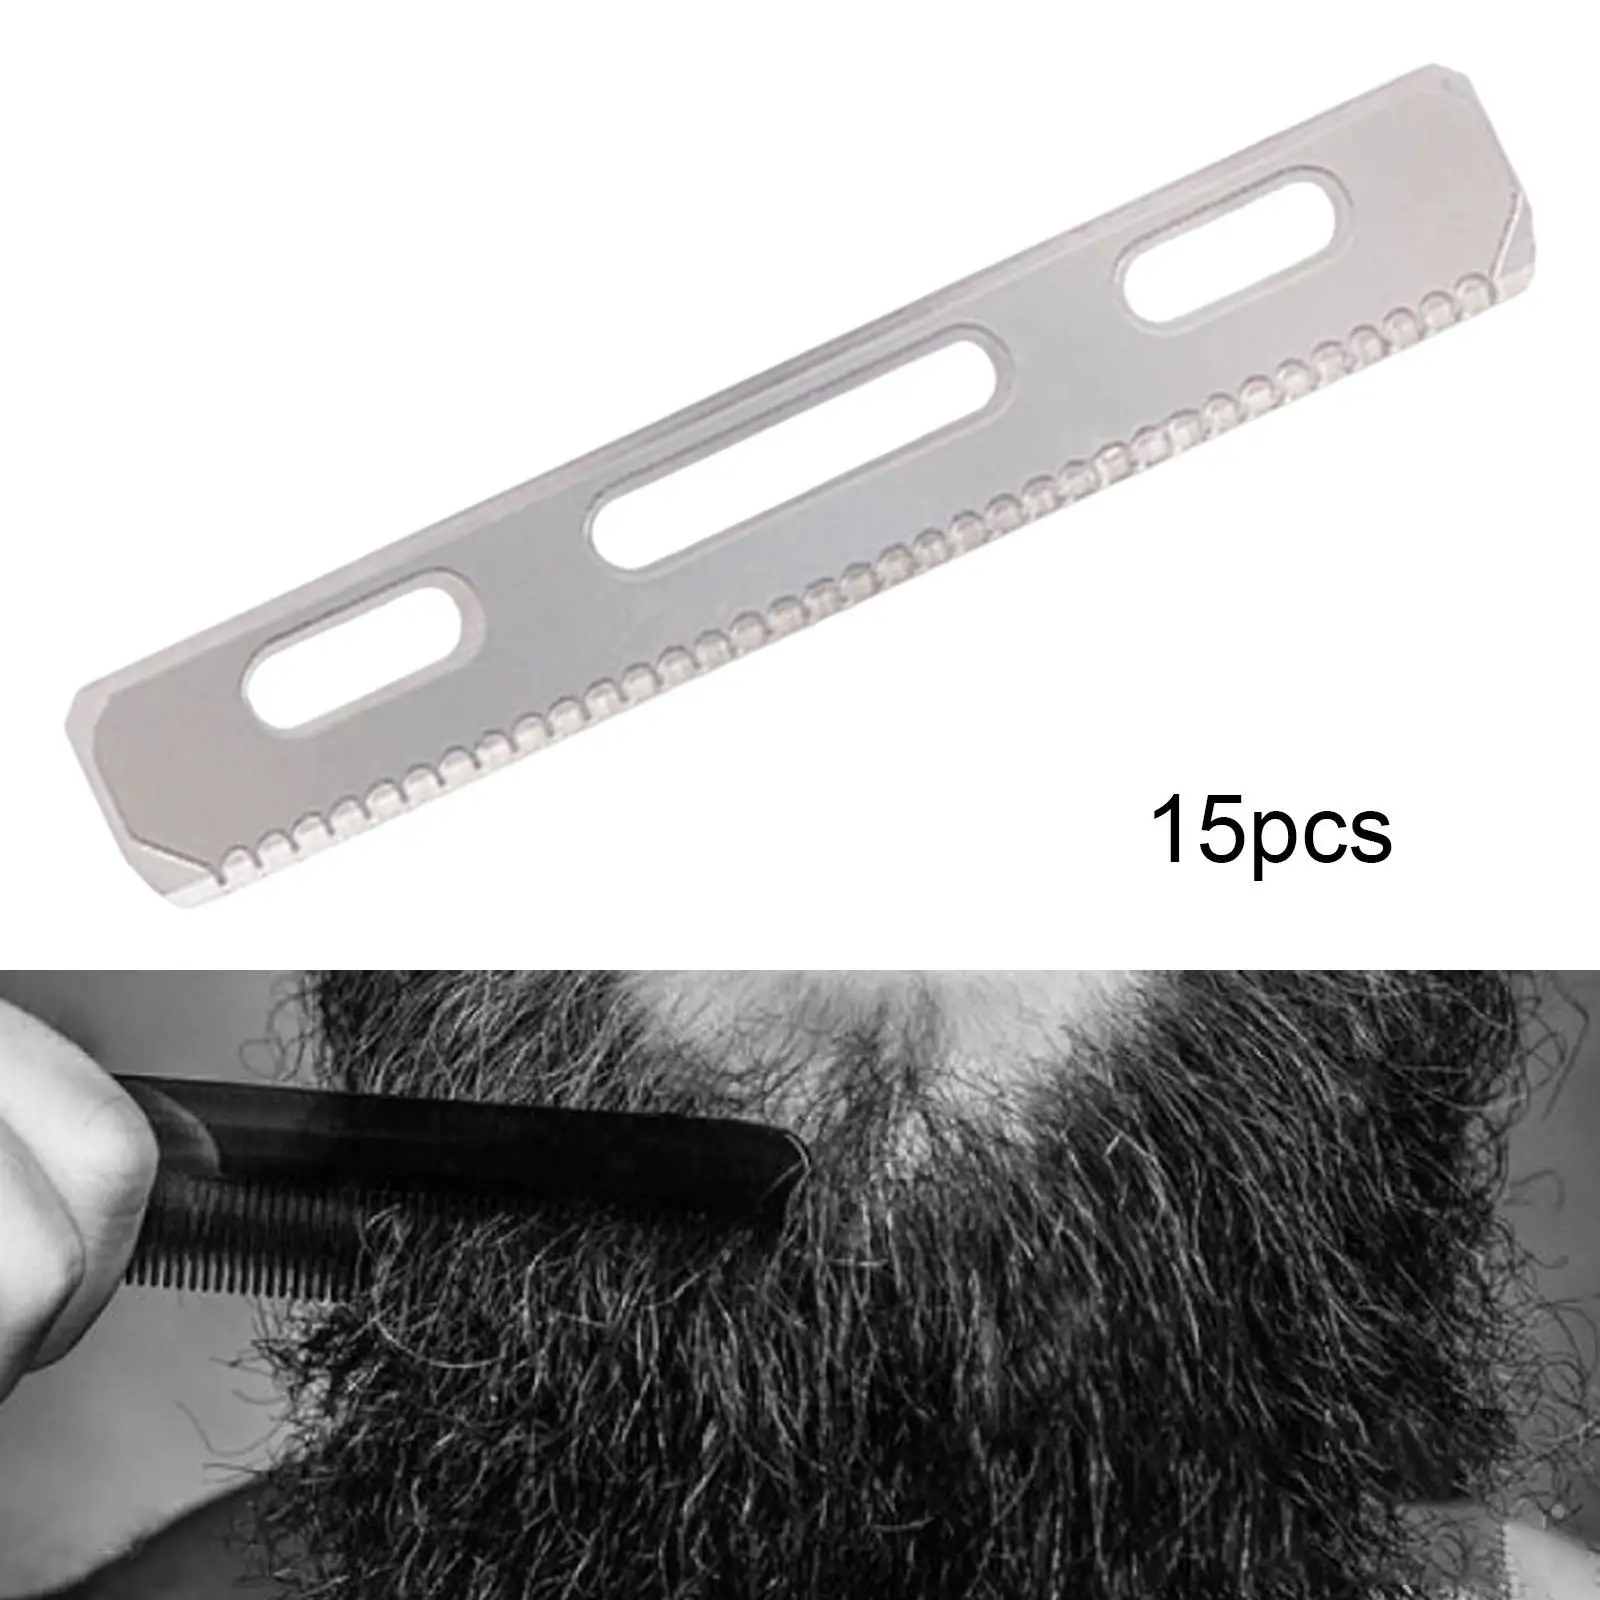 Eyebrow Shaver Stainless Steel with Cover Eyebrow Makeup Eyebrow Shaping Shaver Knife hair Removal Men